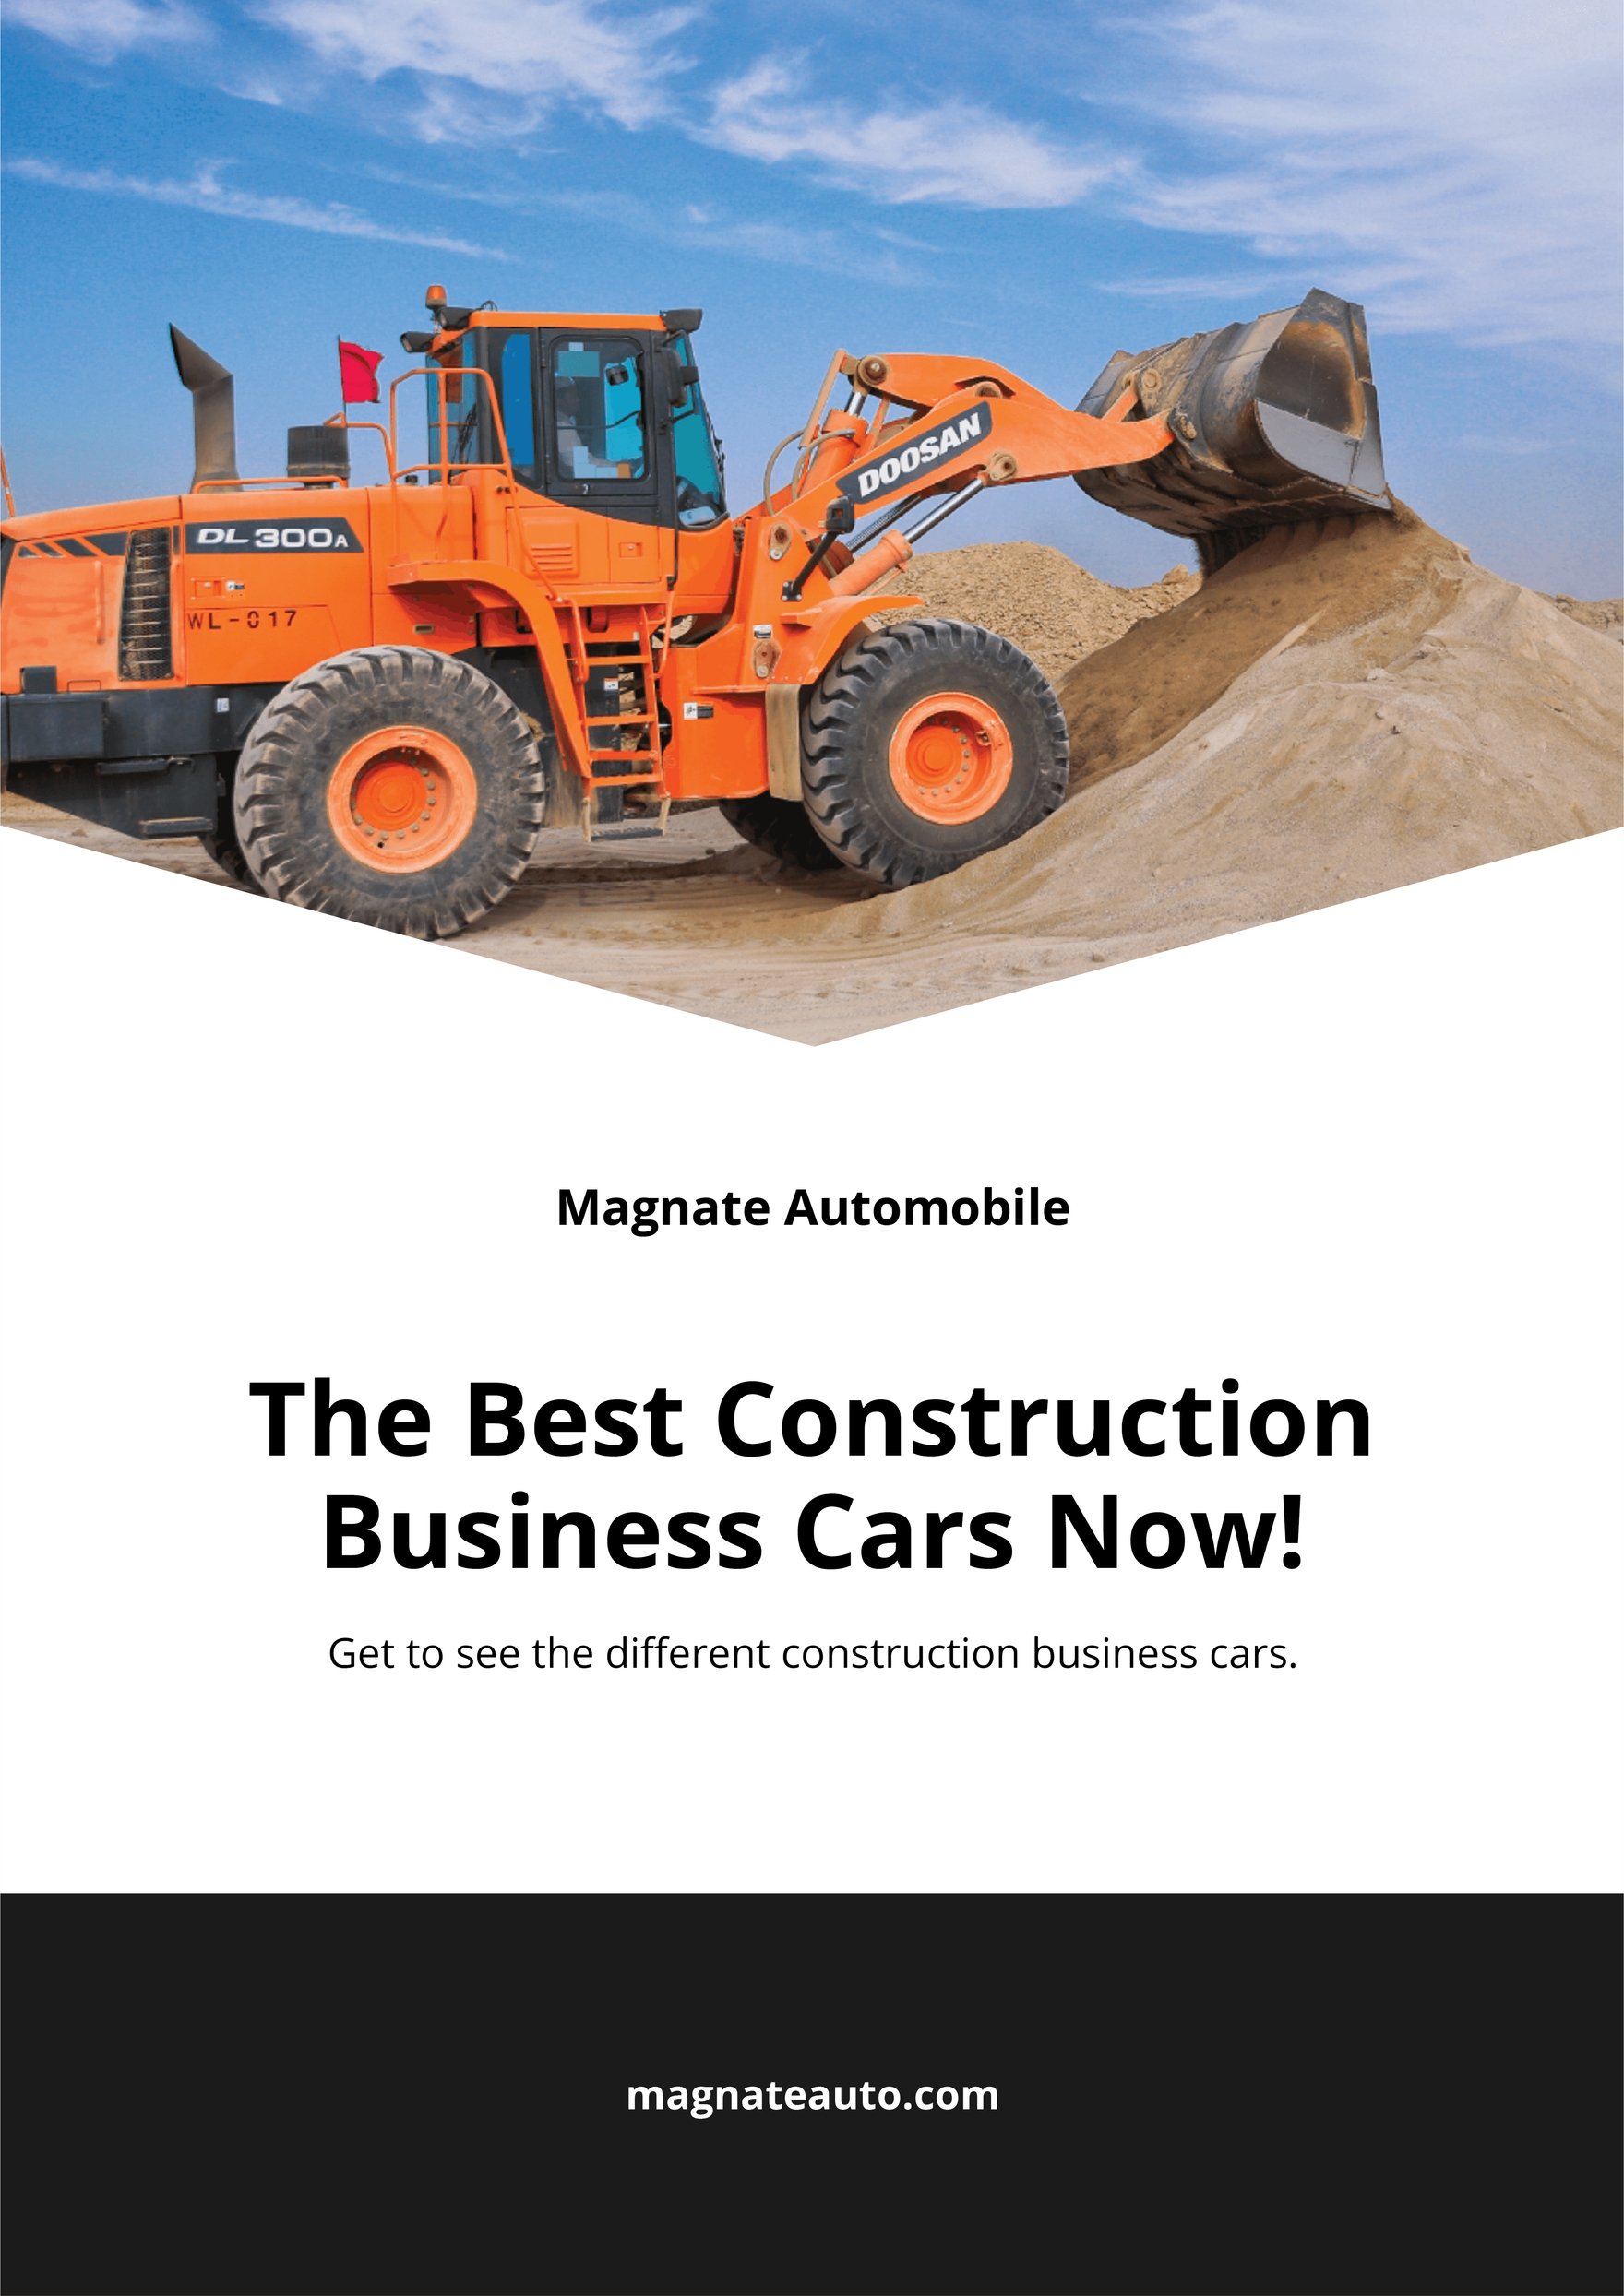 Construction Business Car Magnet Template in Word, Illustrator, PSD, Apple Pages, Publisher